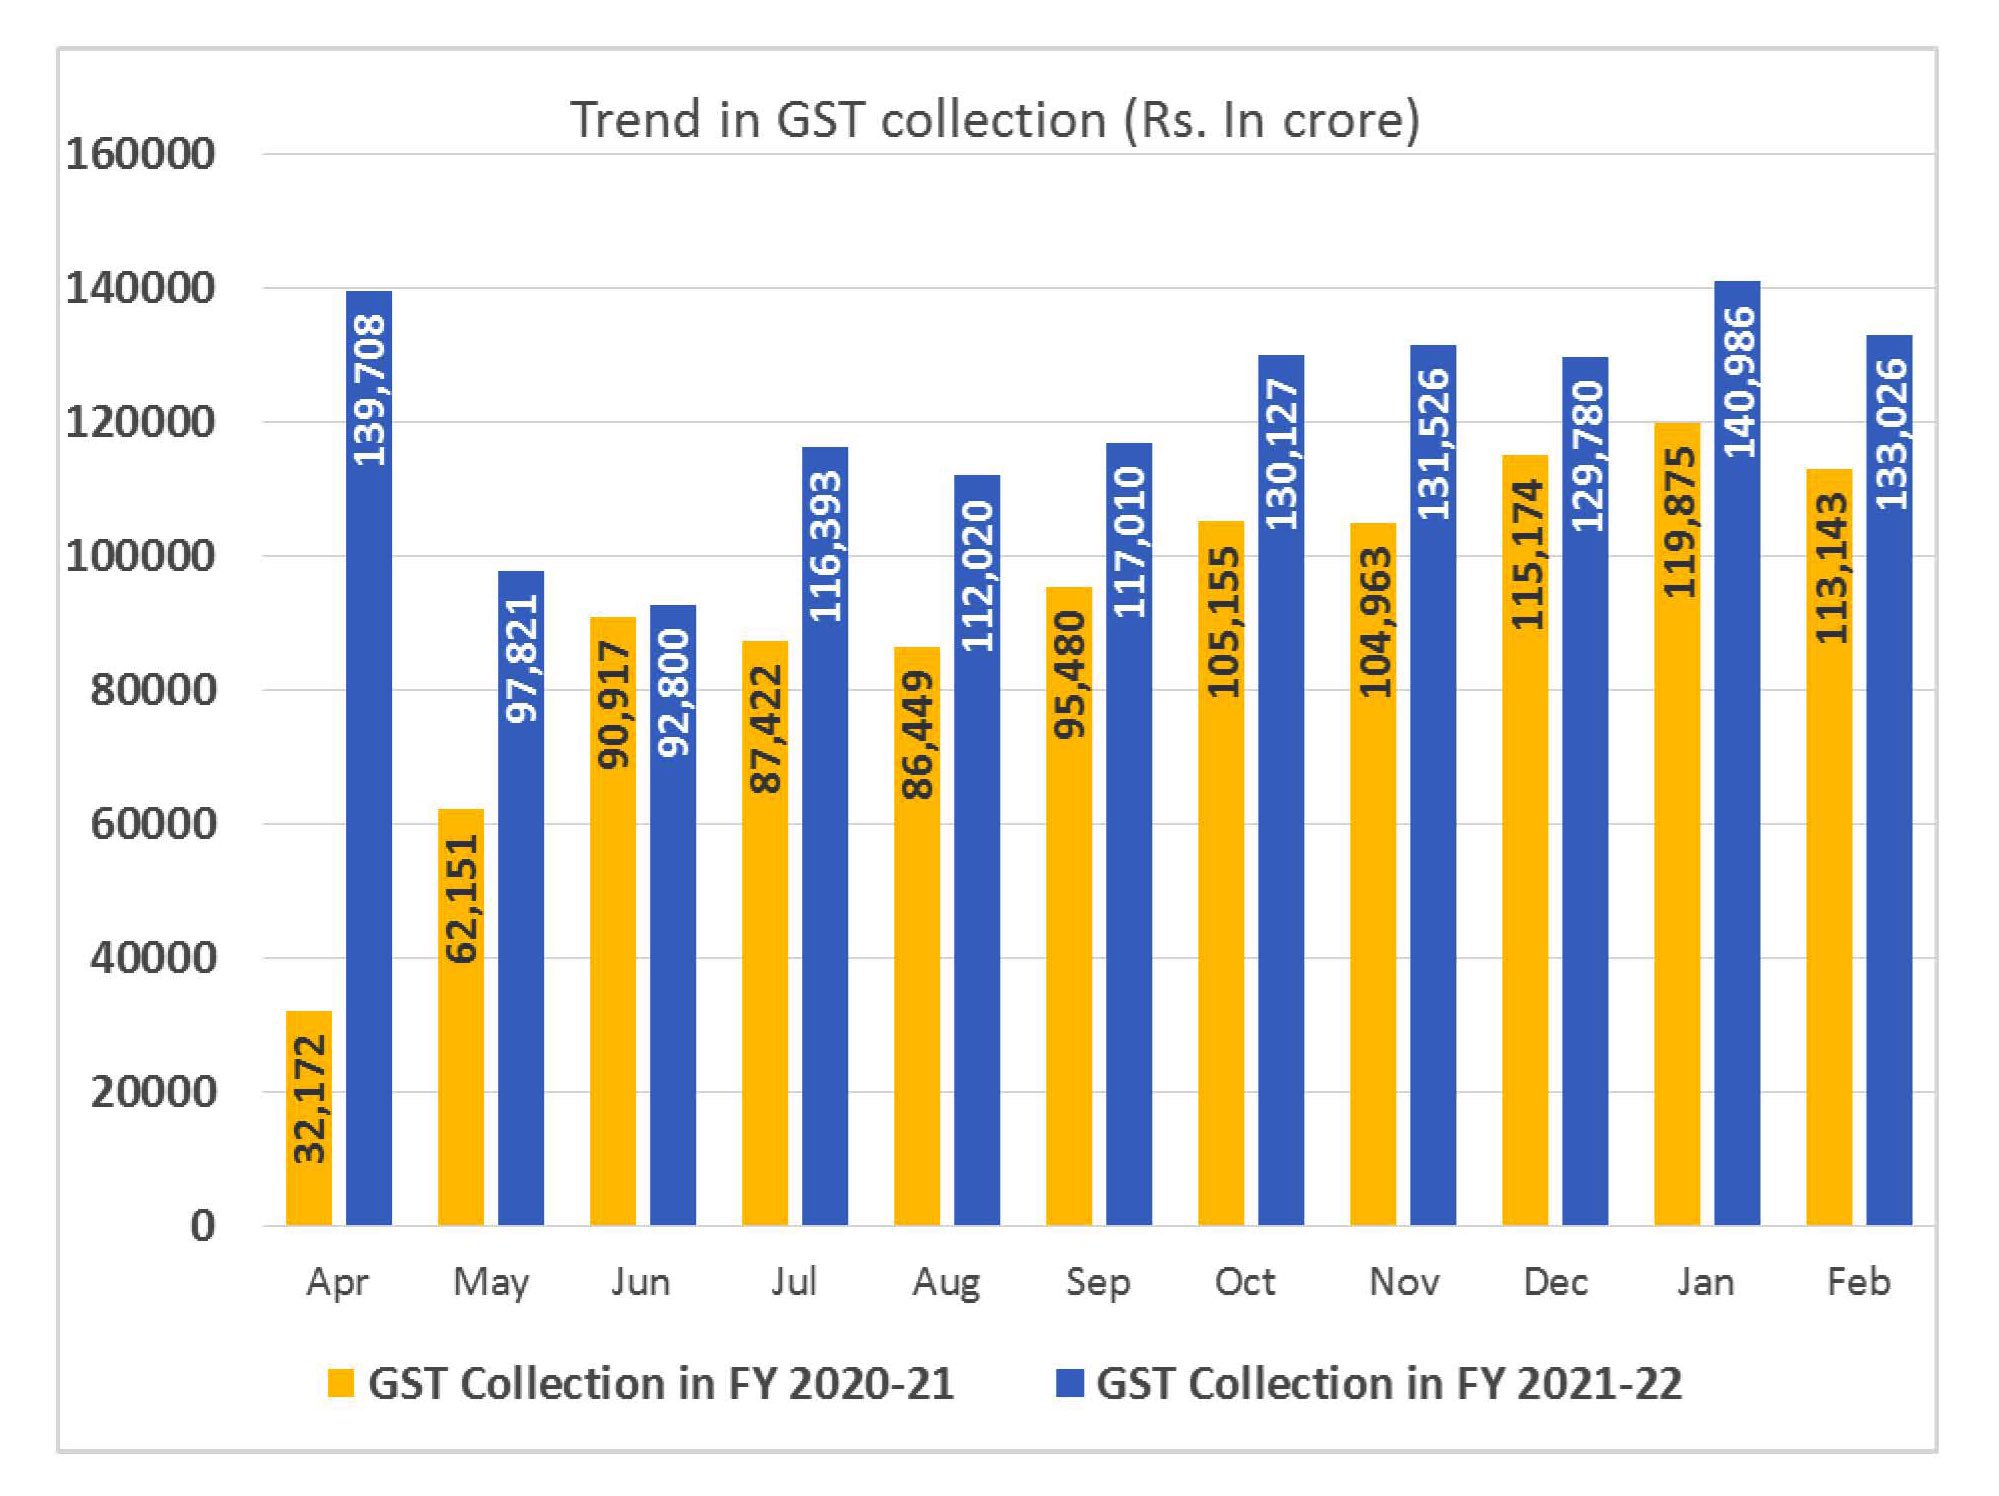 GST Collection in February 2022 Crosses 1.30 Crore, 18 High from Feb 2020